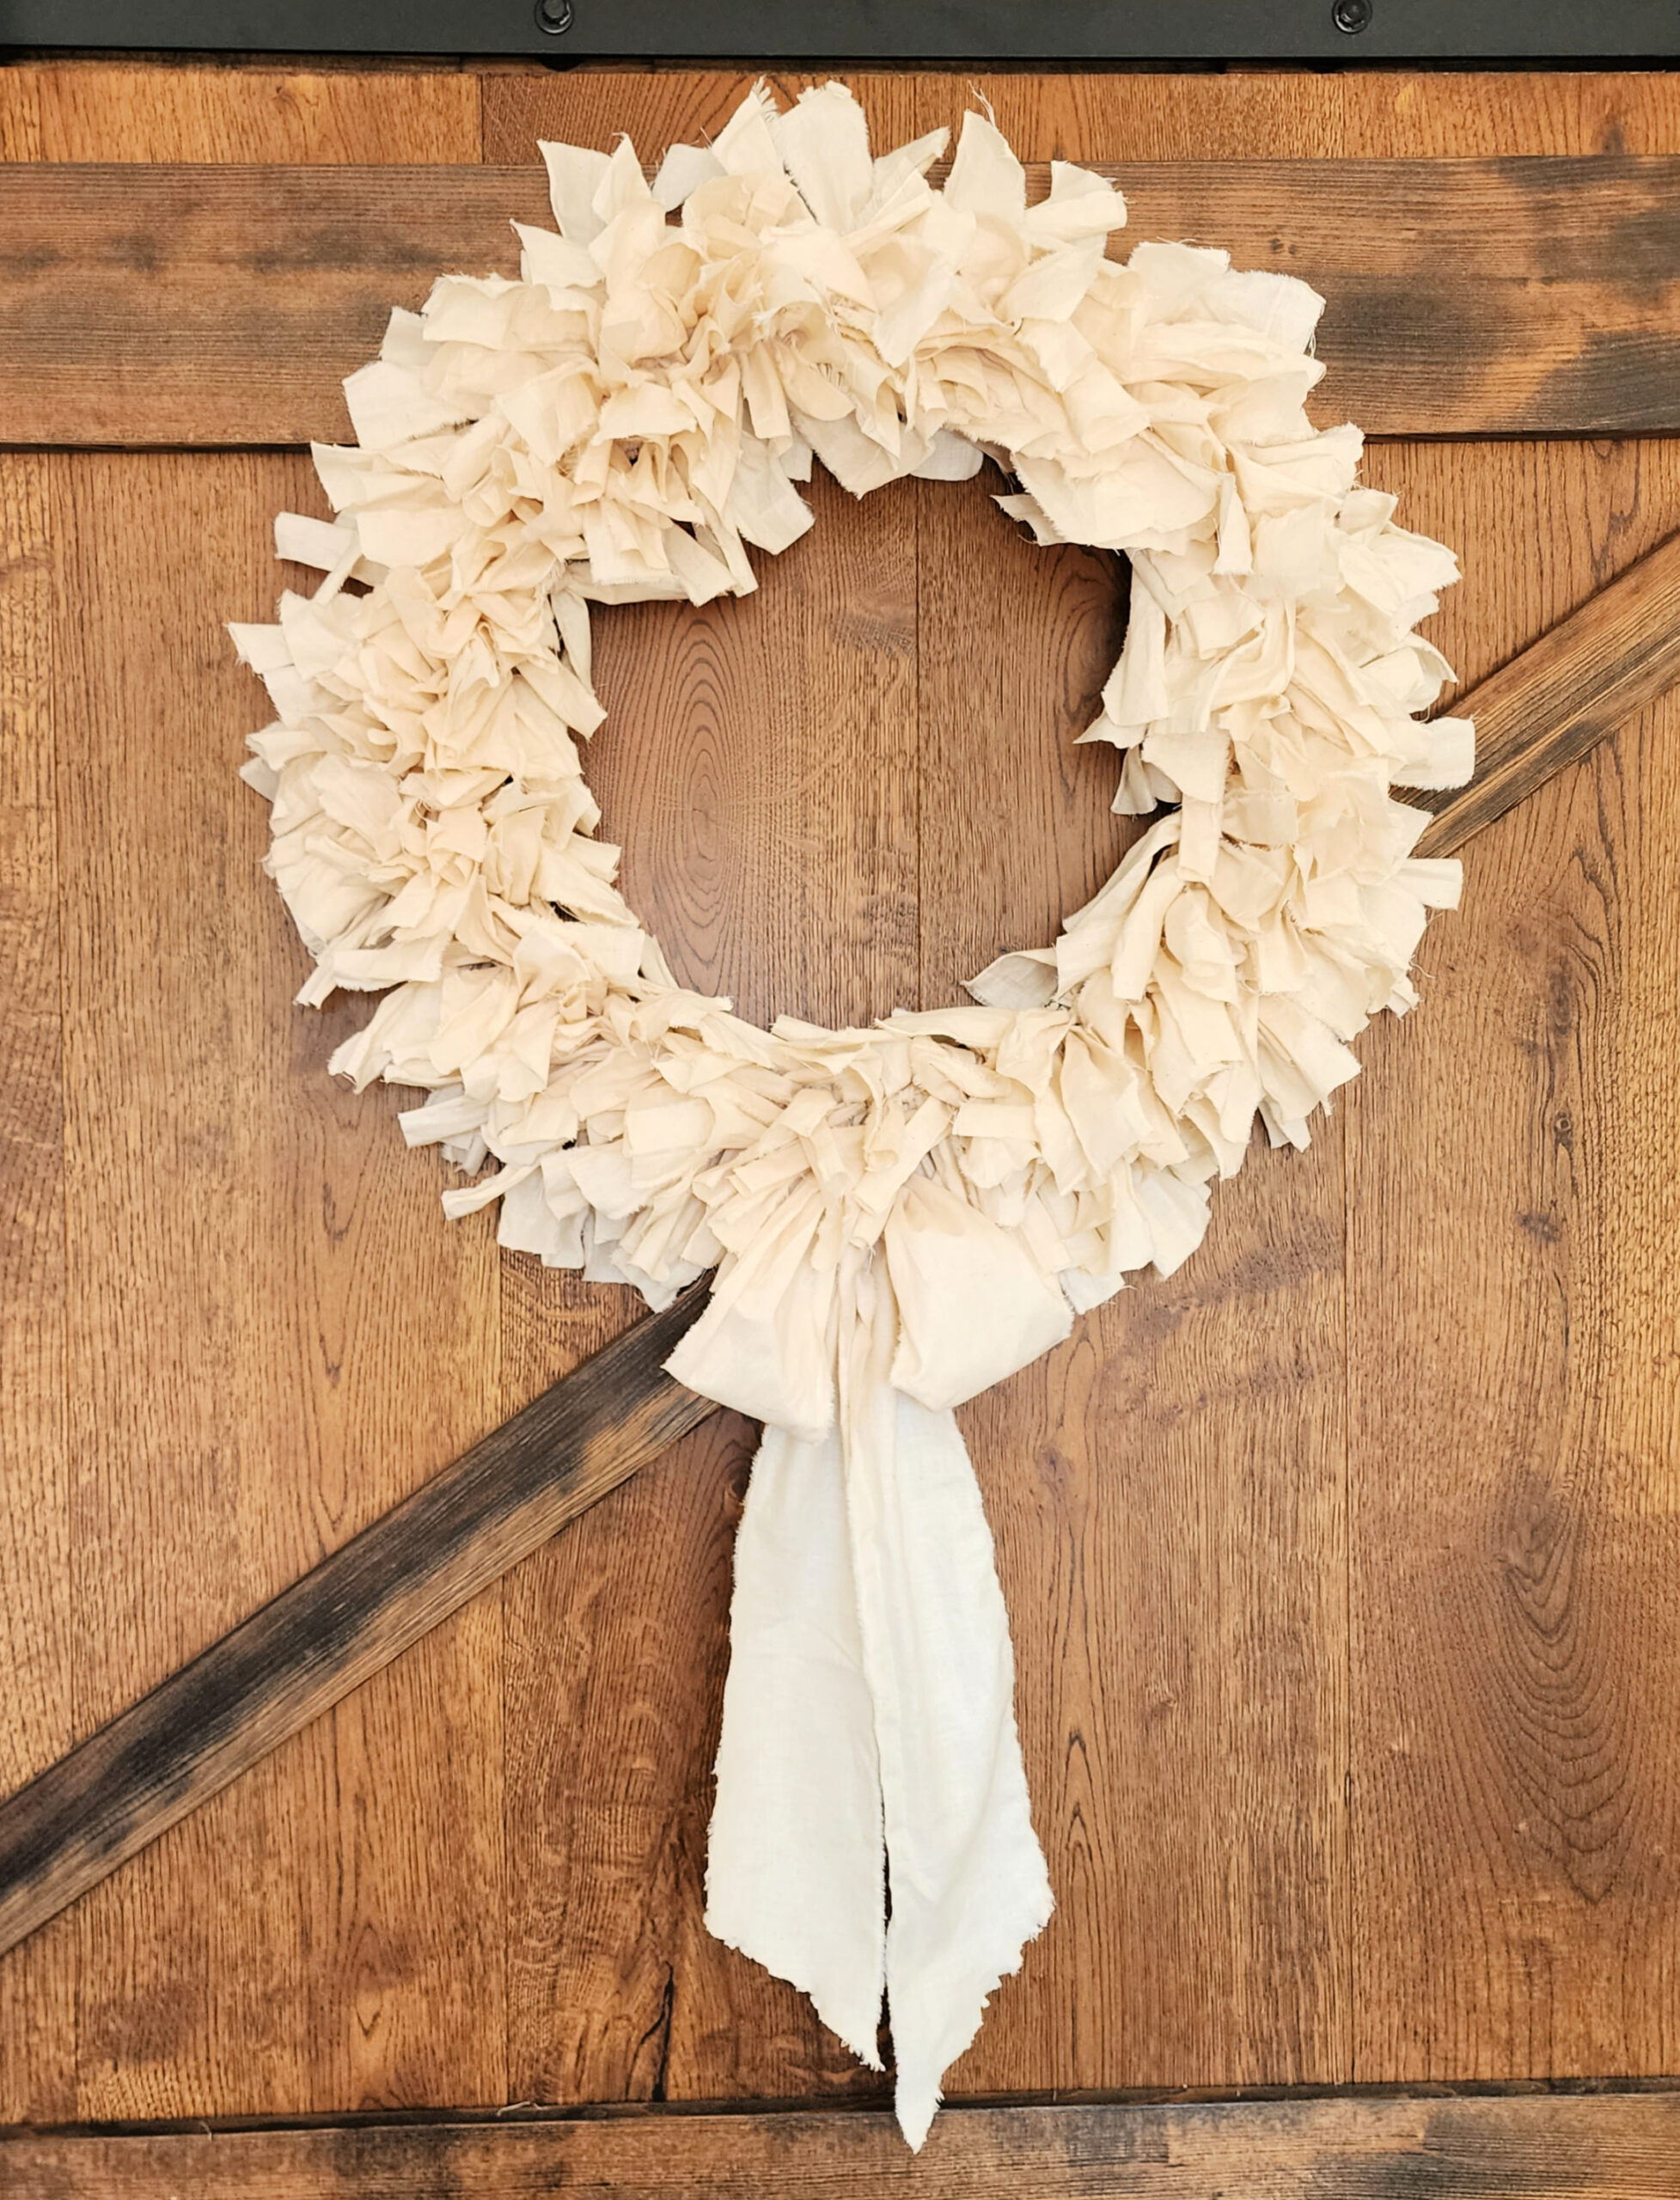 Make a Tattered Fabric Heart Wreath - DIY Beautify - Creating Beauty at Home